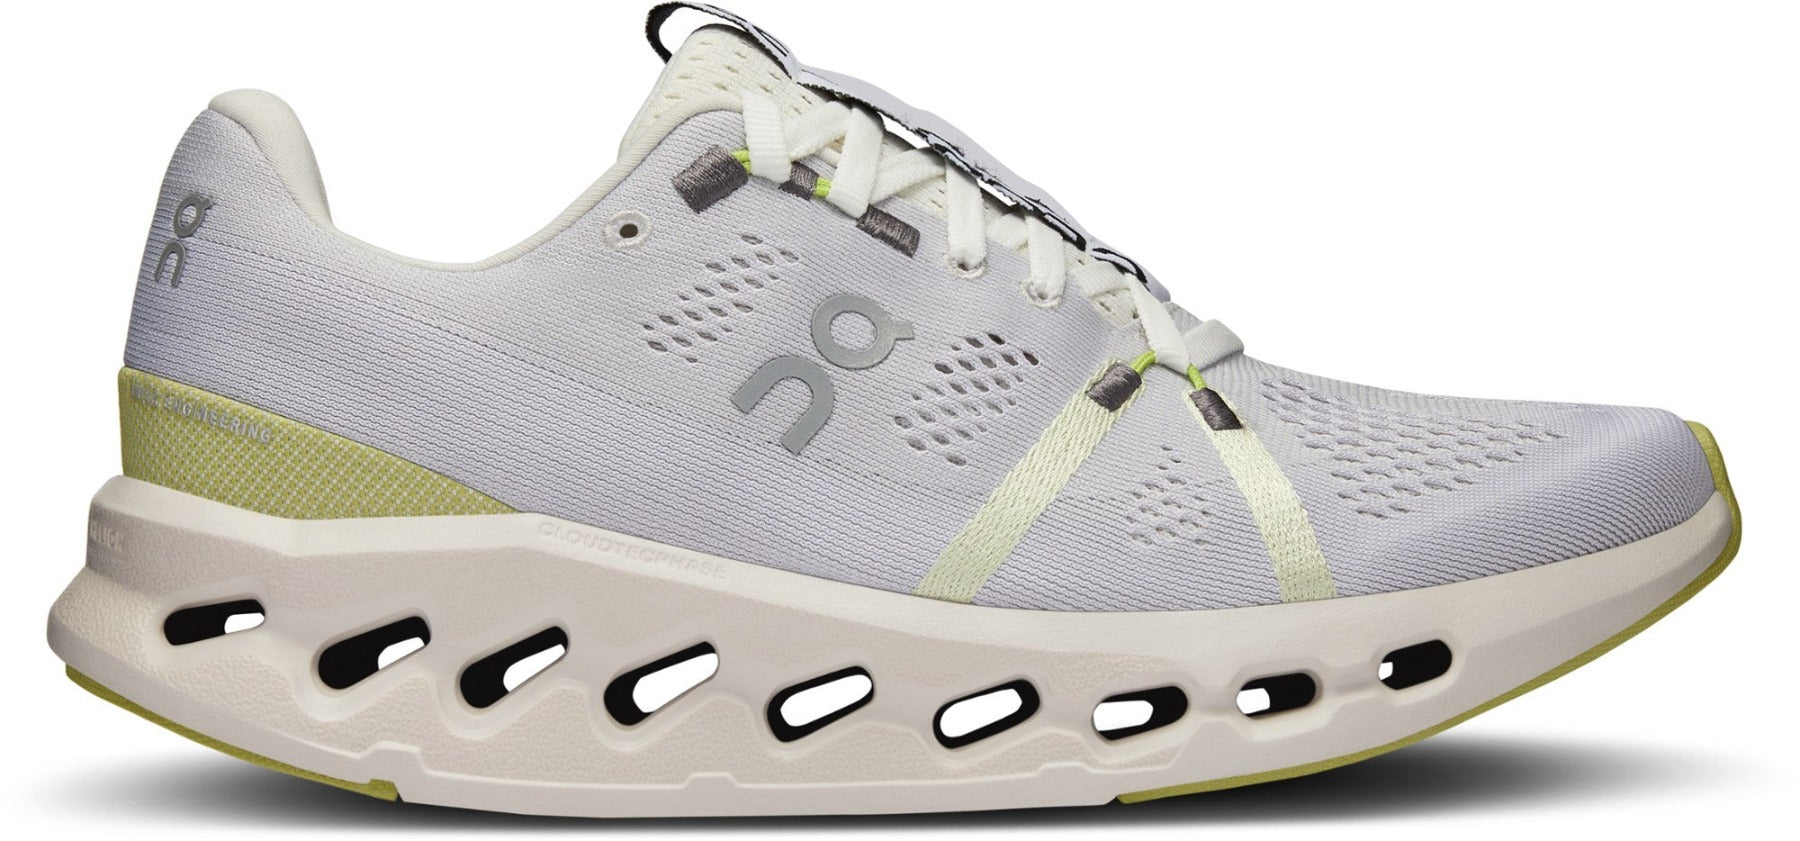 Lateral view of the Women's Cloudsurfer by ON in the color White/Sand